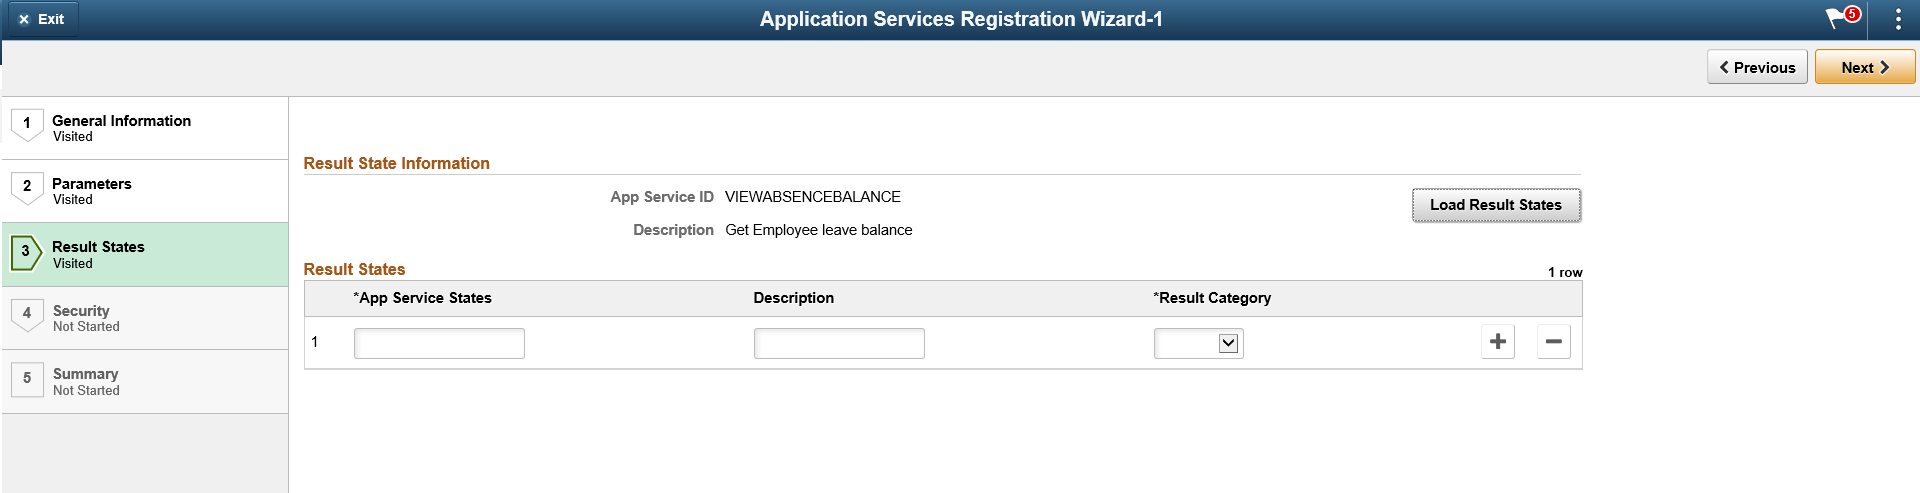 Application Service Registration Wizard - Result States page